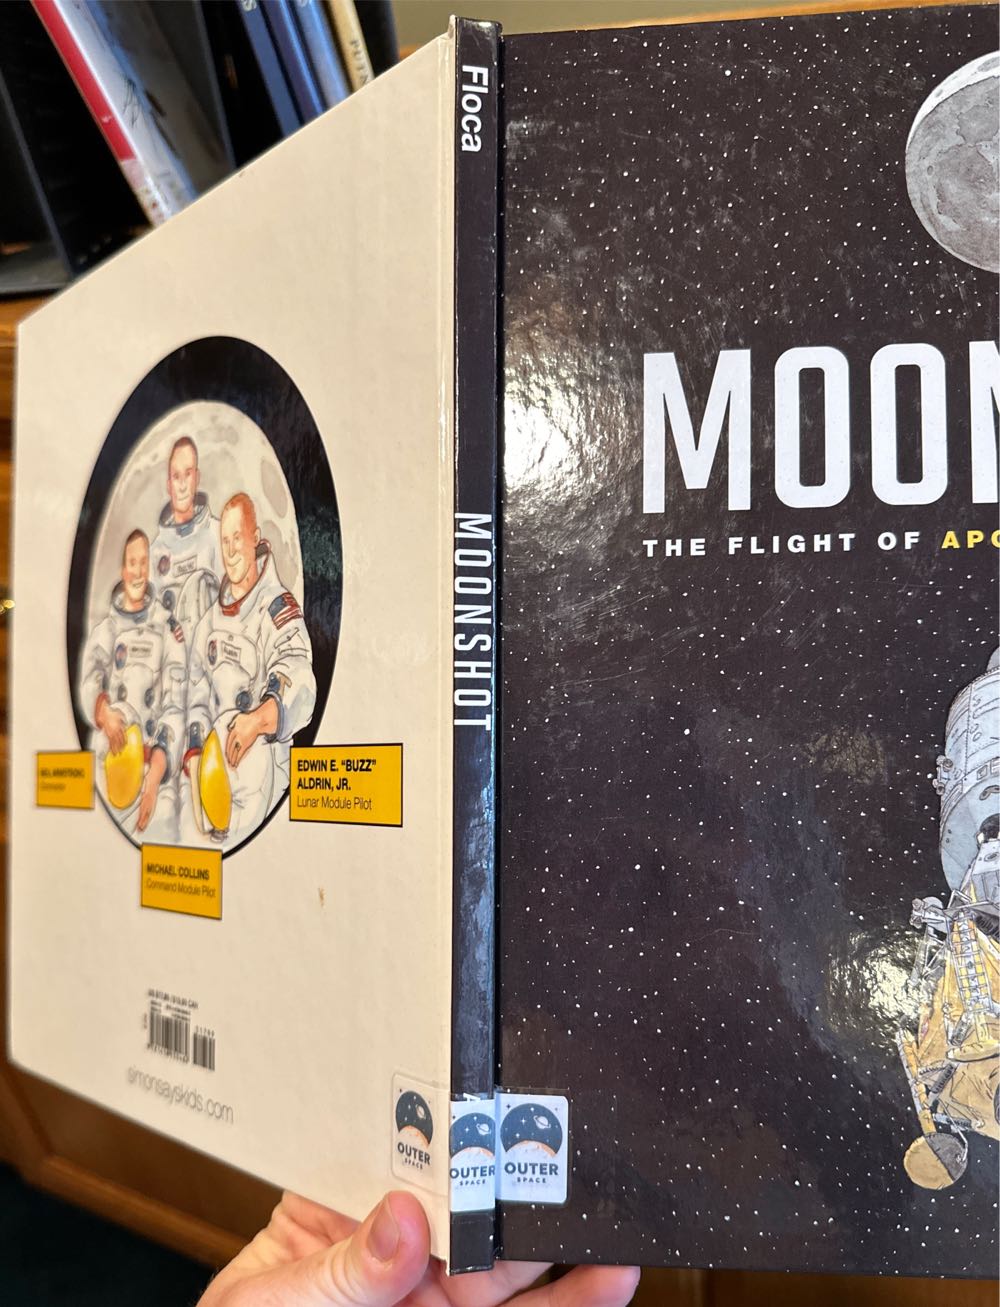 Moonshot The Flight Of Apollo 11 - Brian Floca (Atheneum Books for Young Readers - Hardcover) book collectible [Barcode 9781416950462] - Main Image 2